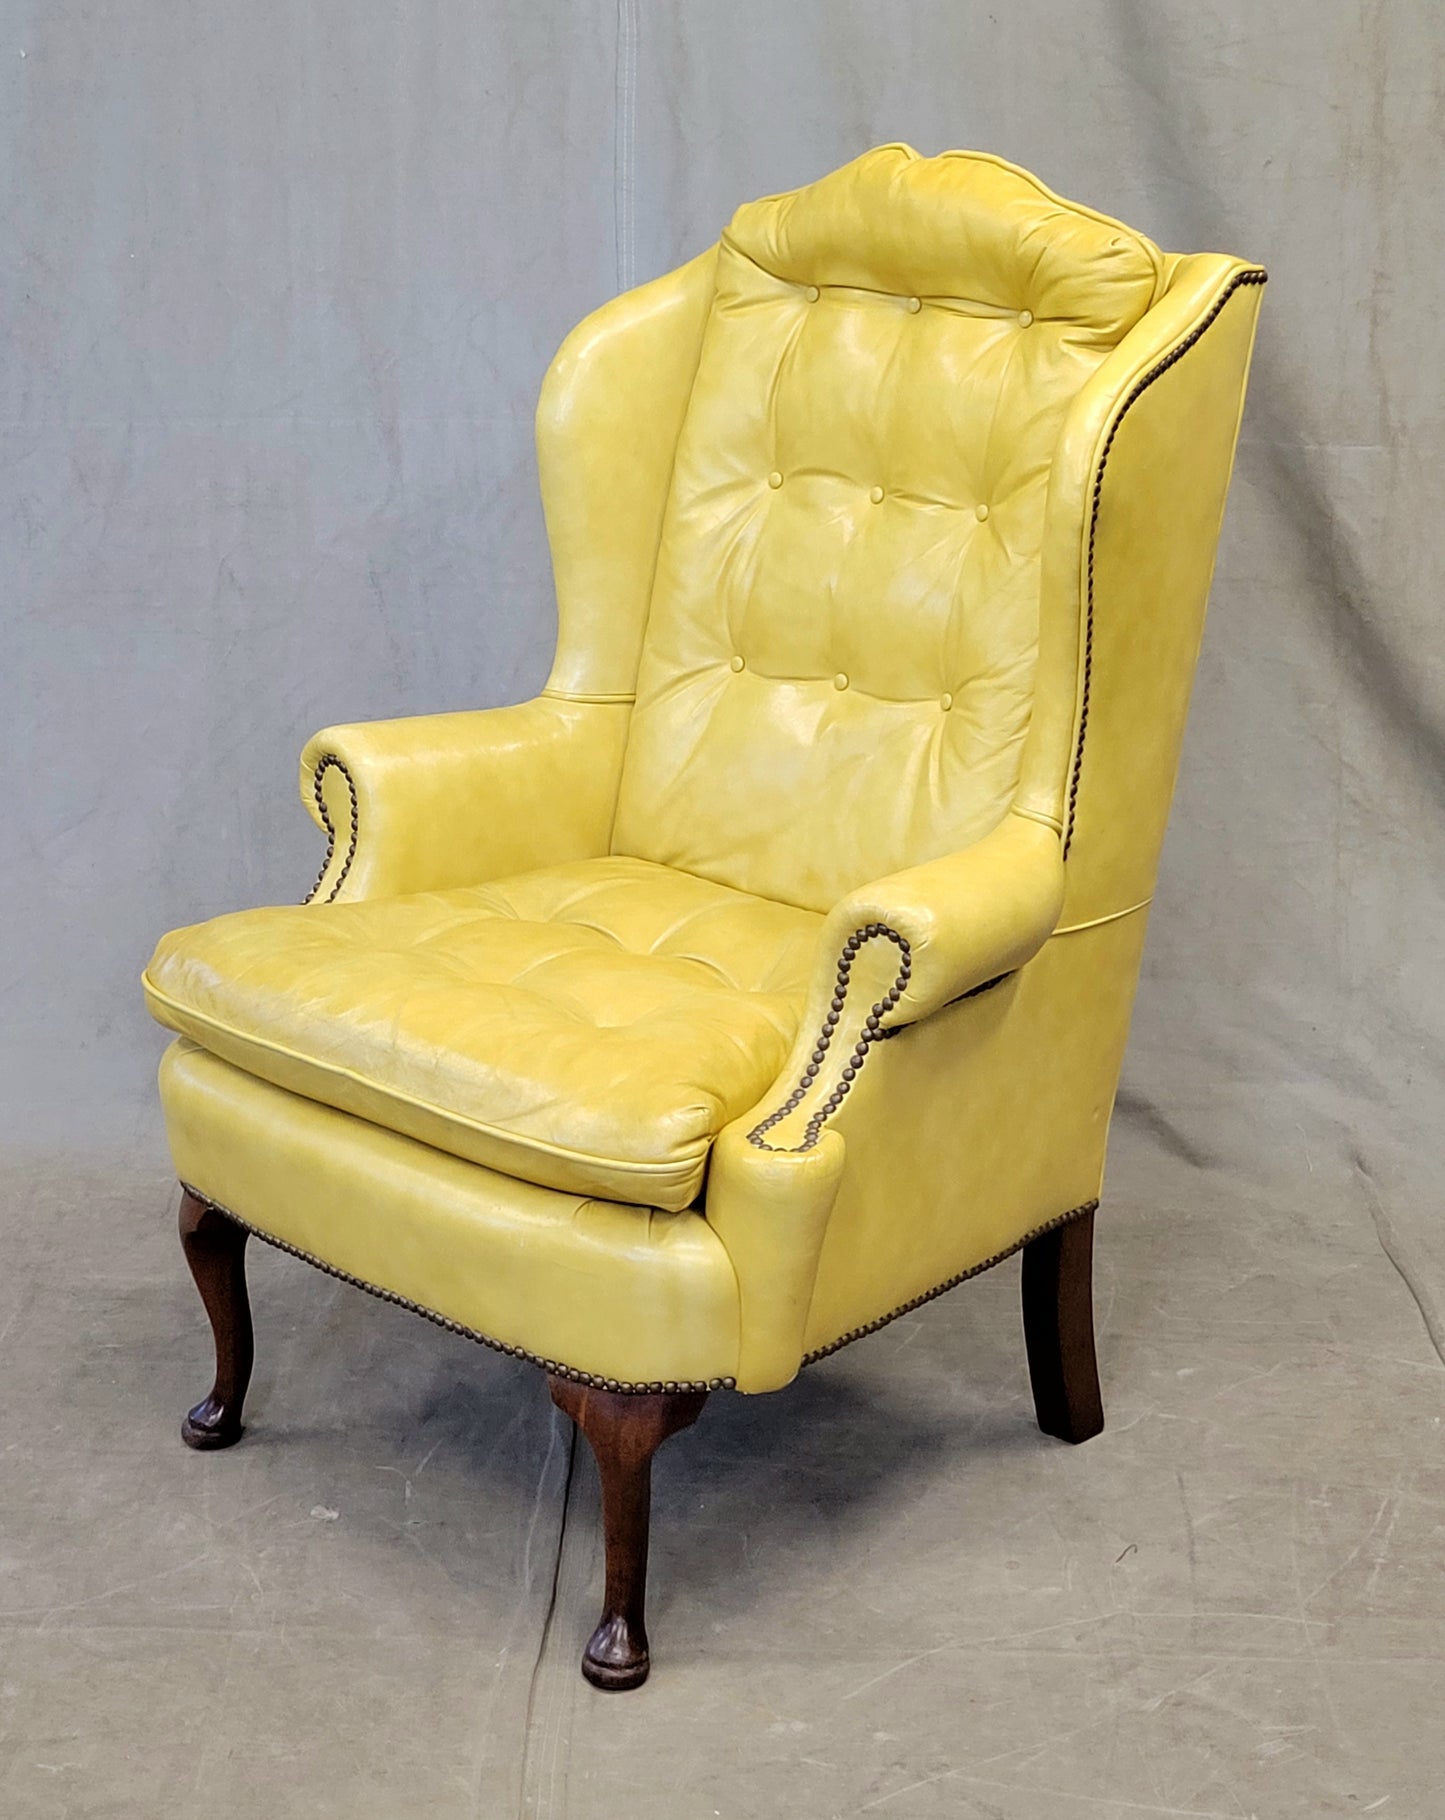 Vintage Classic Brand Top Grain Yellow Leather Chesterfield Chairs - a Pair